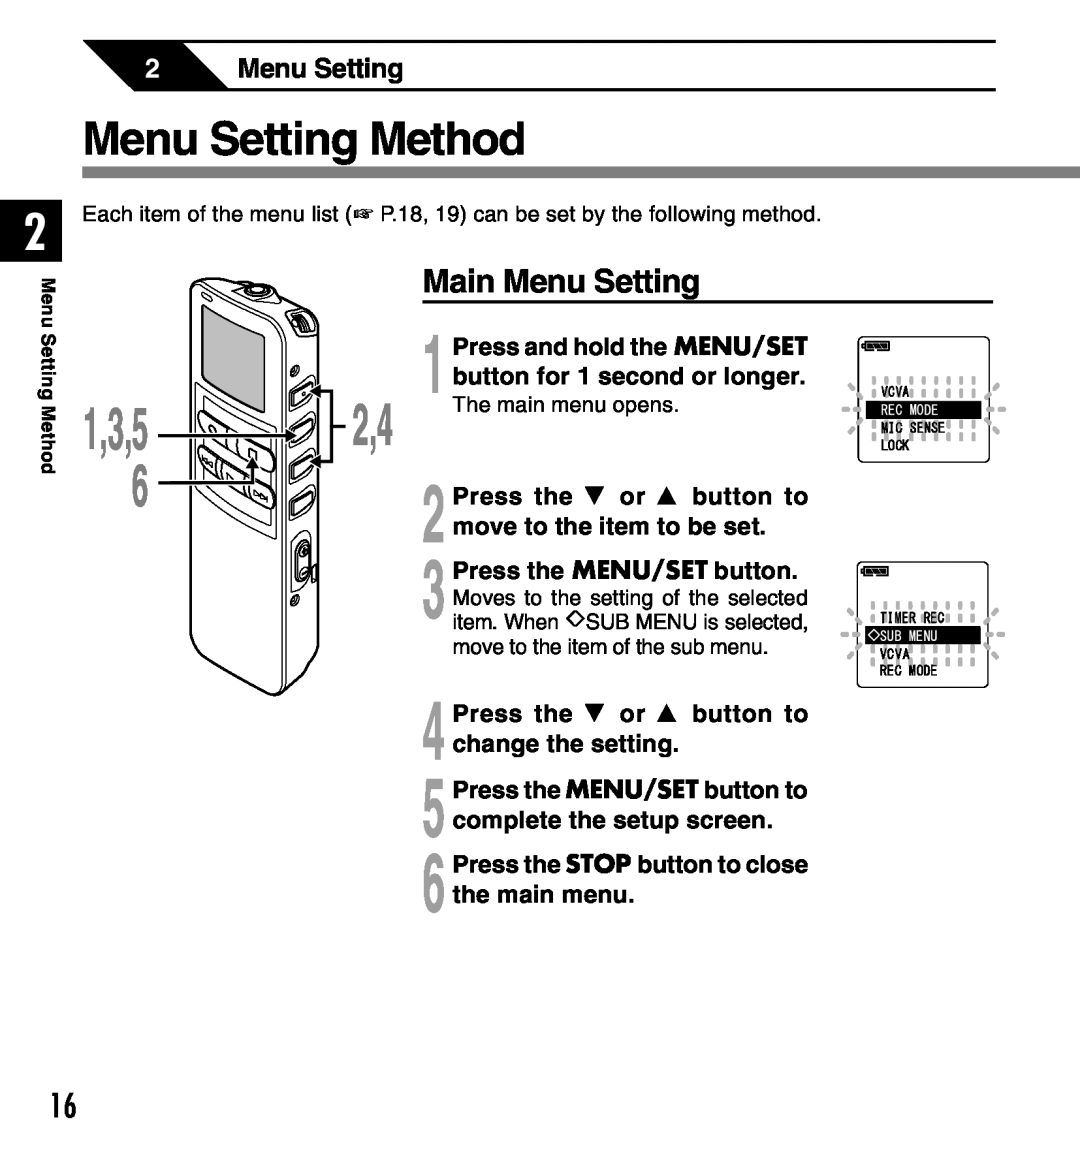 Olympus Menu Setting Method, Main Menu Setting, 1Press and hold the MENU/SET button for 1 second or longer, 1,3,5 2,4 